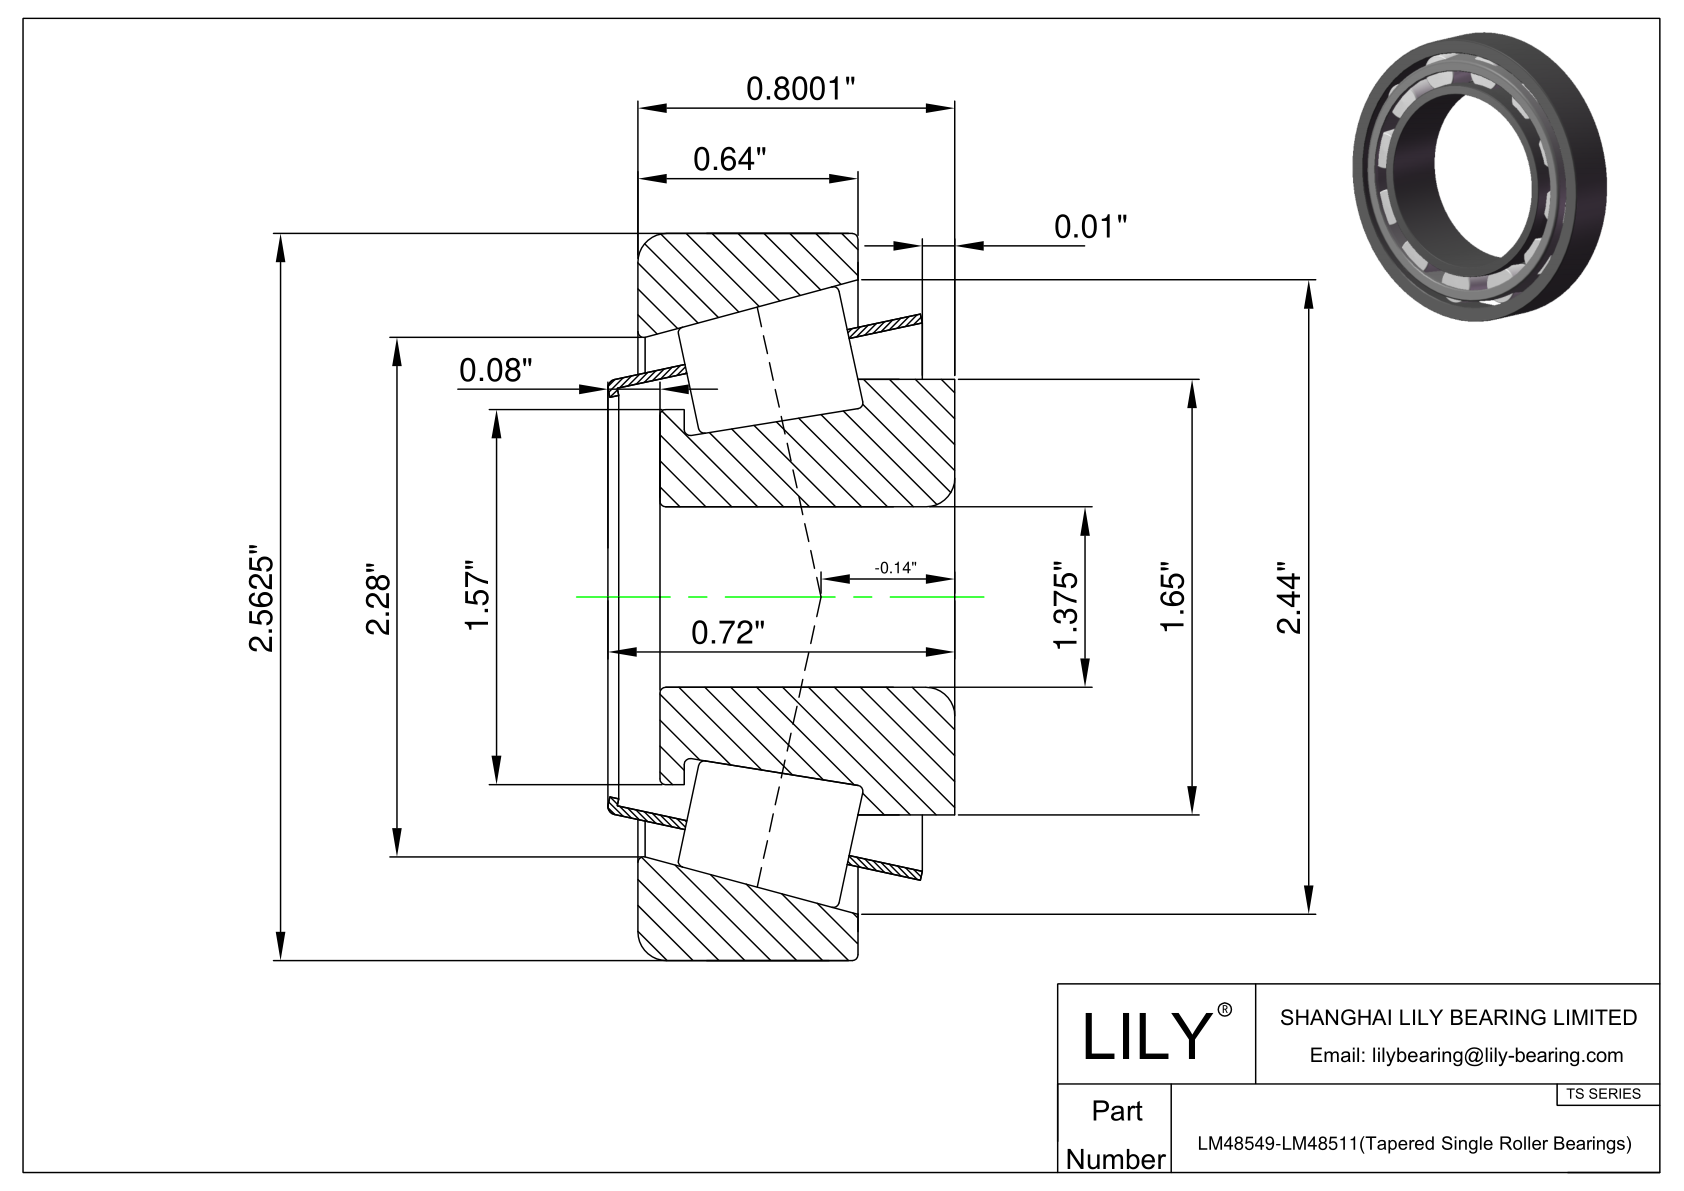 LM48549-LM48511 TS (Tapered Single Roller Bearings) (Imperial) cad drawing